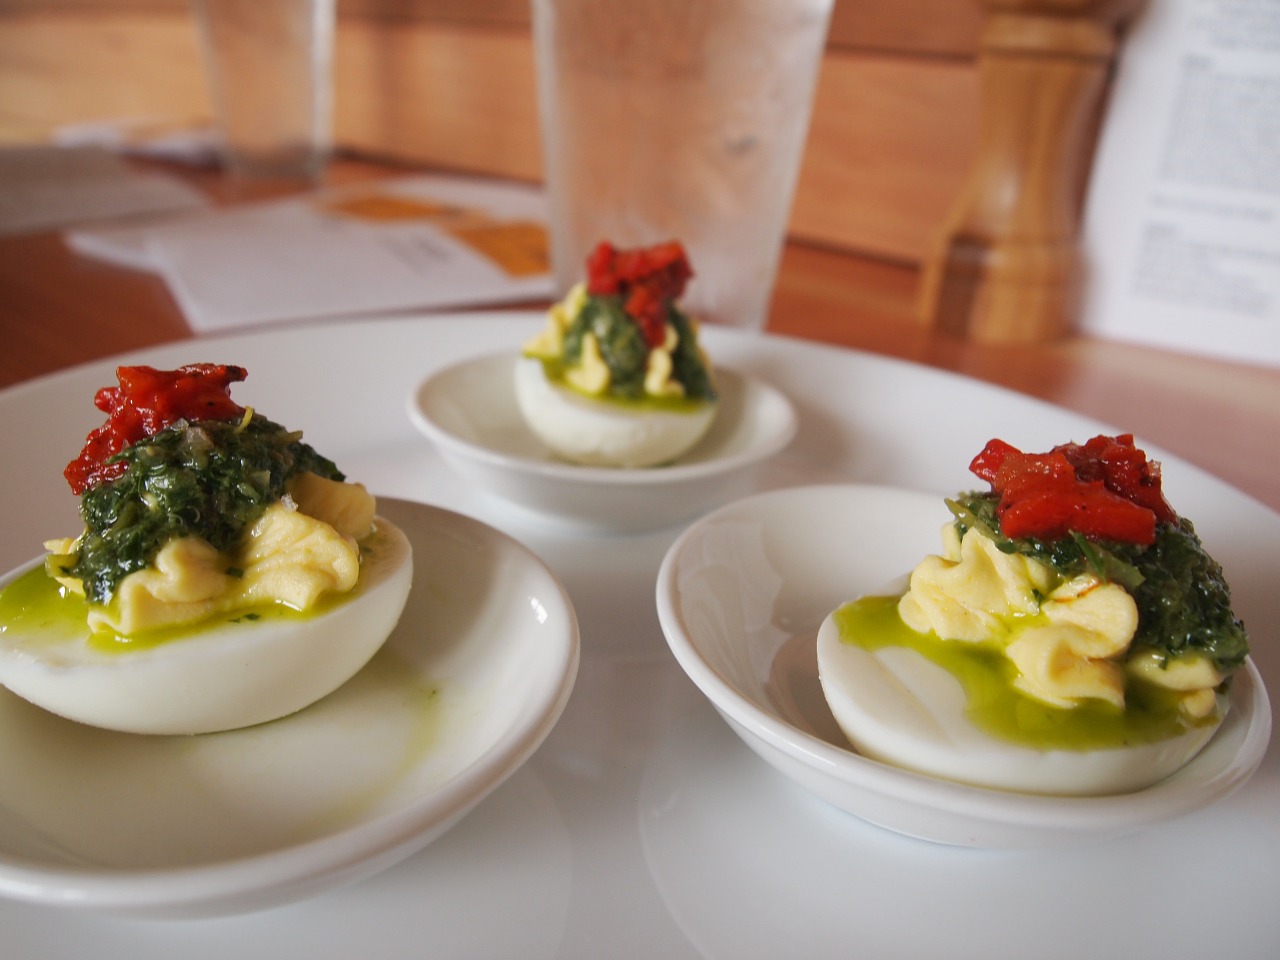 Deviled Eggs With Curry